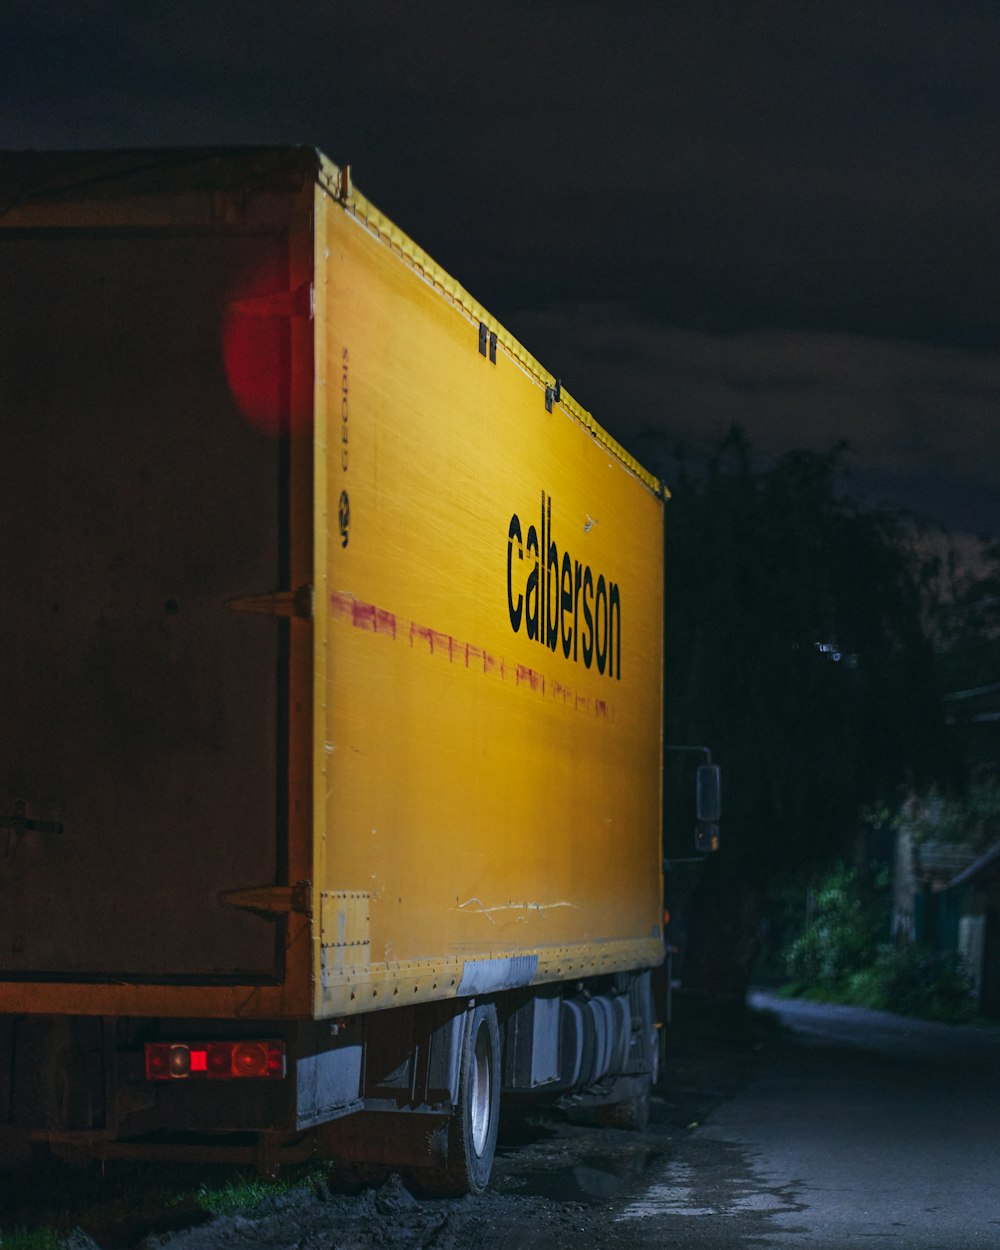 yellow and red box truck on road during night time